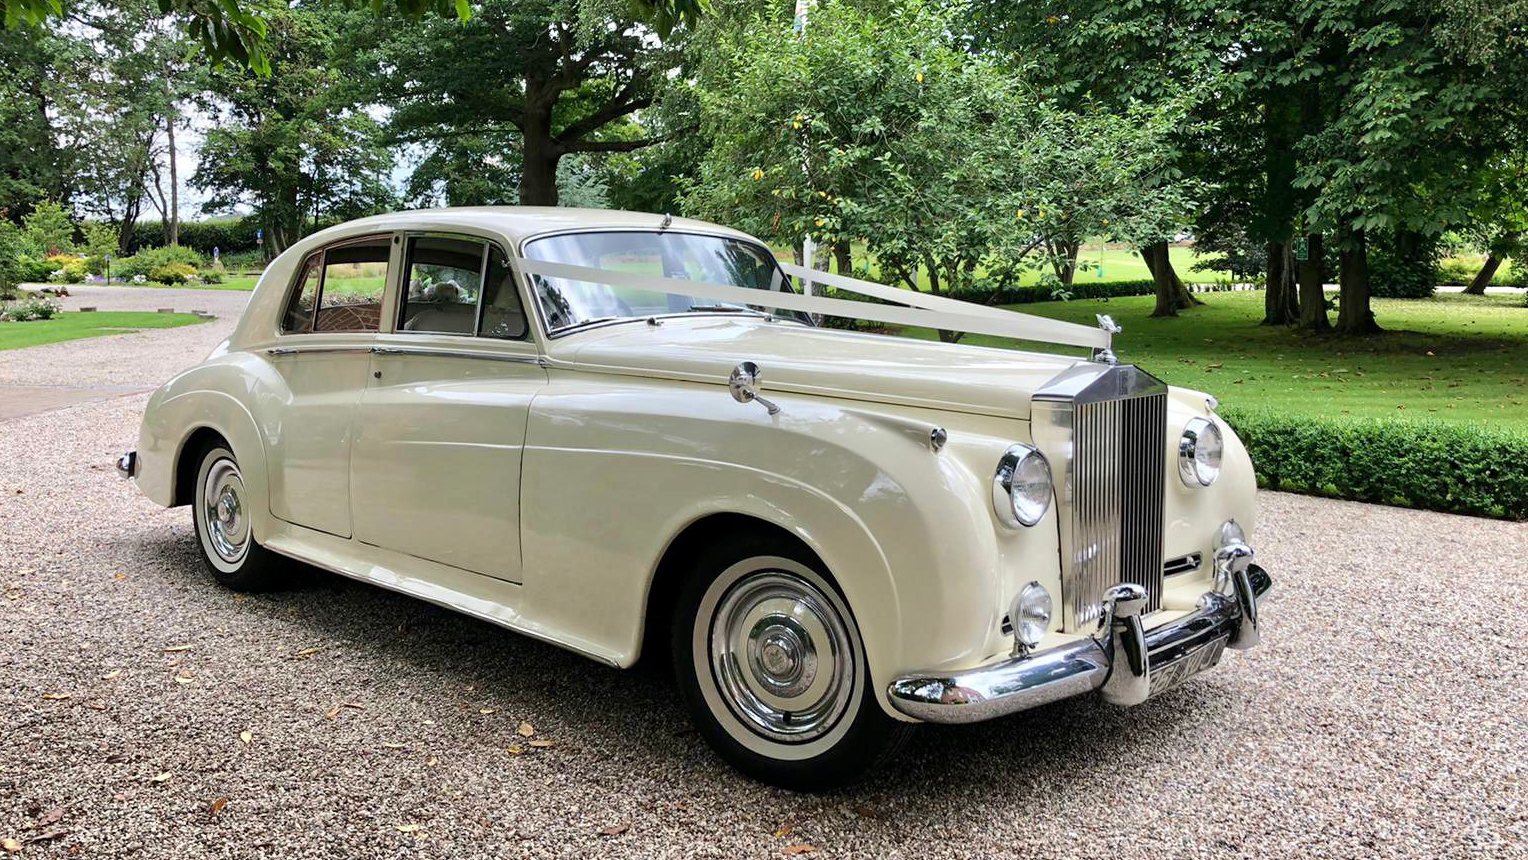 Classic Rolls-Royce Silver Cloud decorated with Ivory Ribbons at a local Cheshunt park with green trees in the background